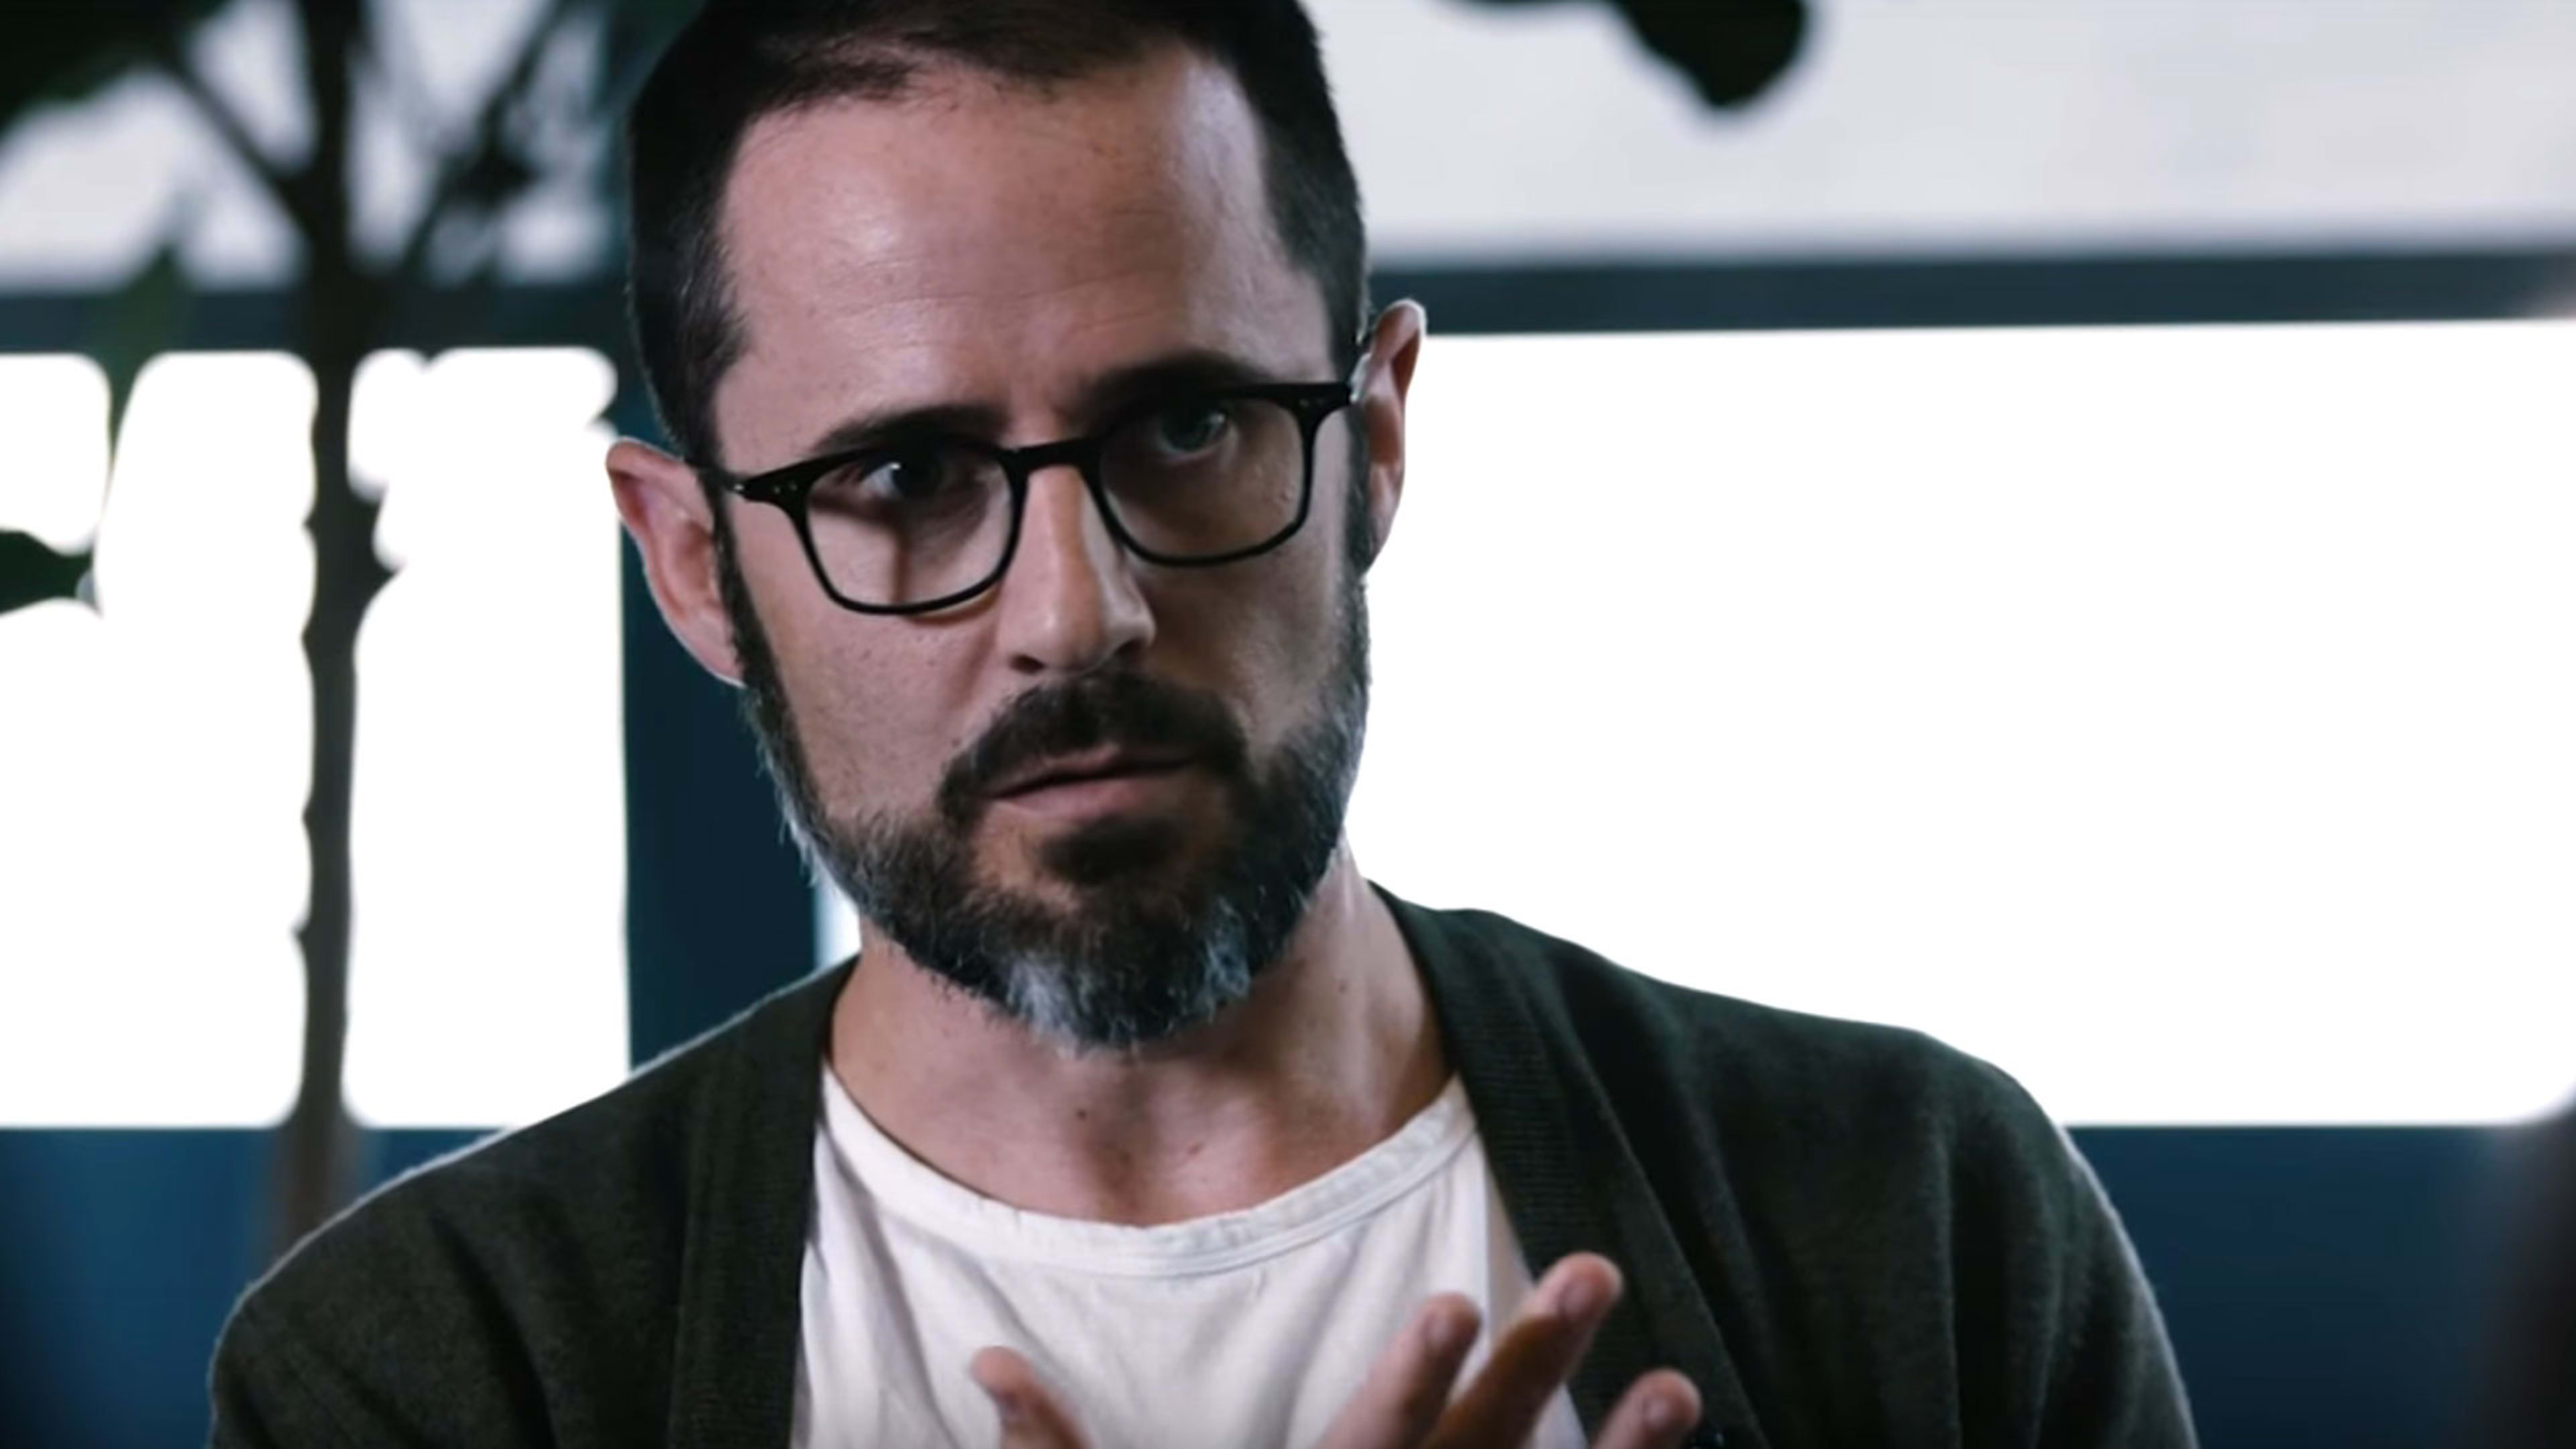 Watch Twitter’s cofounder describe how ads fuel fake news